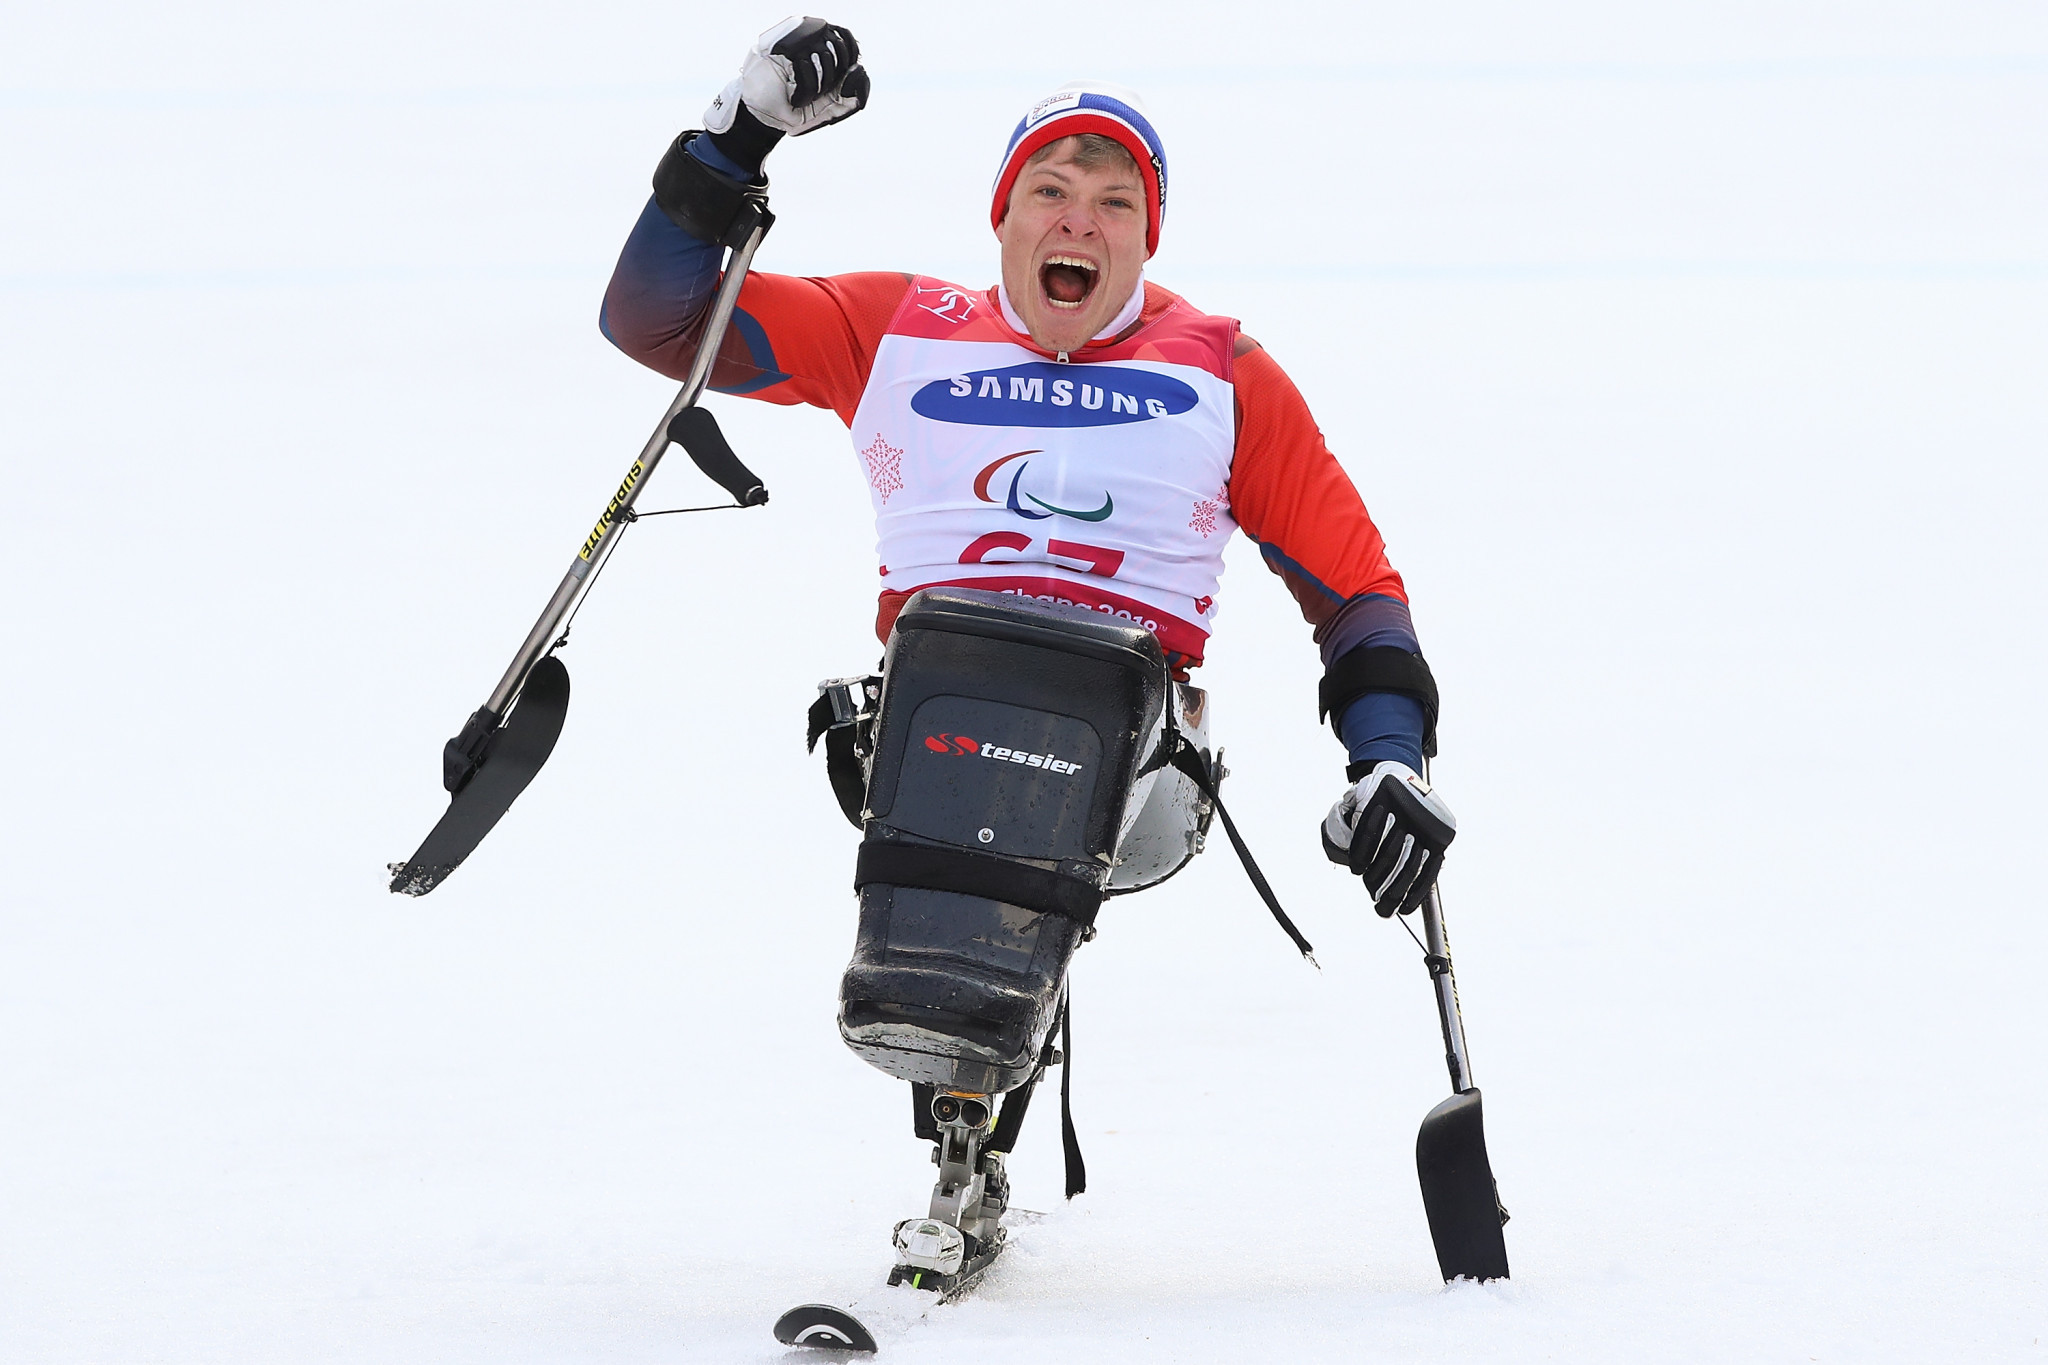 Skiing sensation Pedersen is ready to star at the upcoming Games. GETTY IMAGES